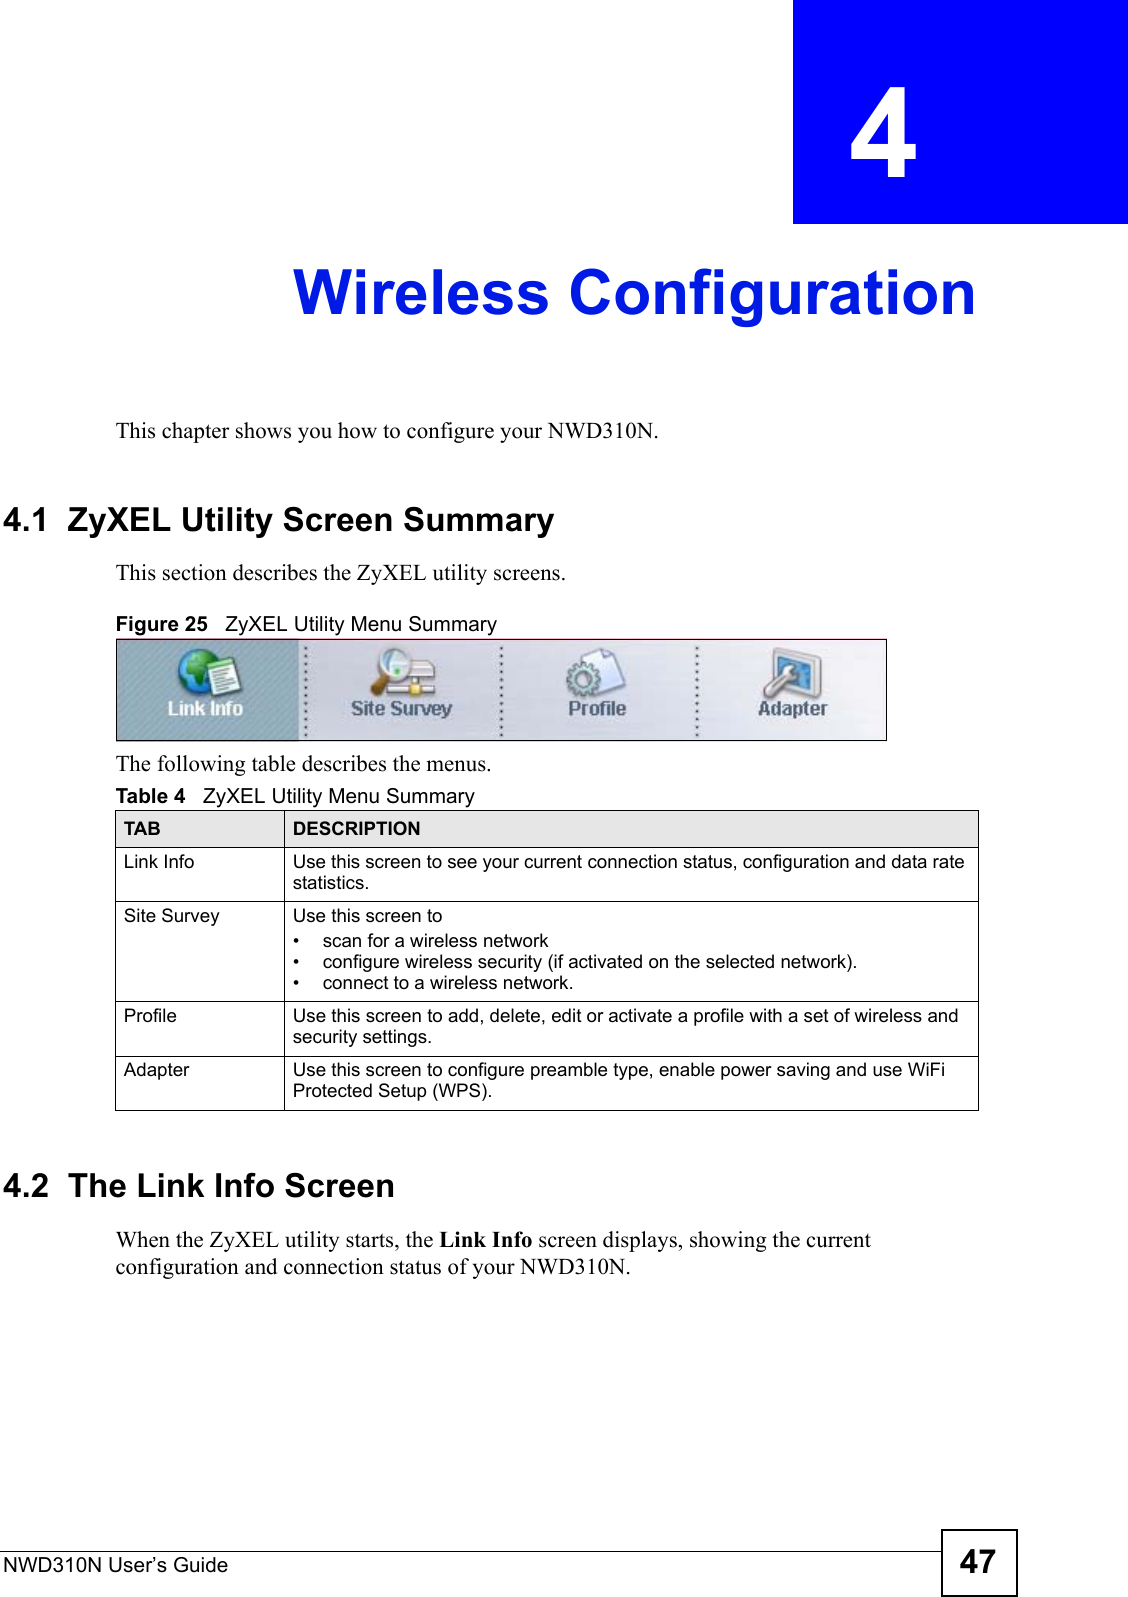 NWD310N User’s Guide 47CHAPTER  4 Wireless ConfigurationThis chapter shows you how to configure your NWD310N.4.1  ZyXEL Utility Screen Summary This section describes the ZyXEL utility screens. Figure 25   ZyXEL Utility Menu Summary The following table describes the menus. 4.2  The Link Info Screen When the ZyXEL utility starts, the Link Info screen displays, showing the current configuration and connection status of your NWD310N.Table 4   ZyXEL Utility Menu SummaryTAB DESCRIPTIONLink Info Use this screen to see your current connection status, configuration and data rate statistics.Site Survey Use this screen to • scan for a wireless network• configure wireless security (if activated on the selected network).• connect to a wireless network.Profile Use this screen to add, delete, edit or activate a profile with a set of wireless and security settings.Adapter Use this screen to configure preamble type, enable power saving and use WiFi Protected Setup (WPS).